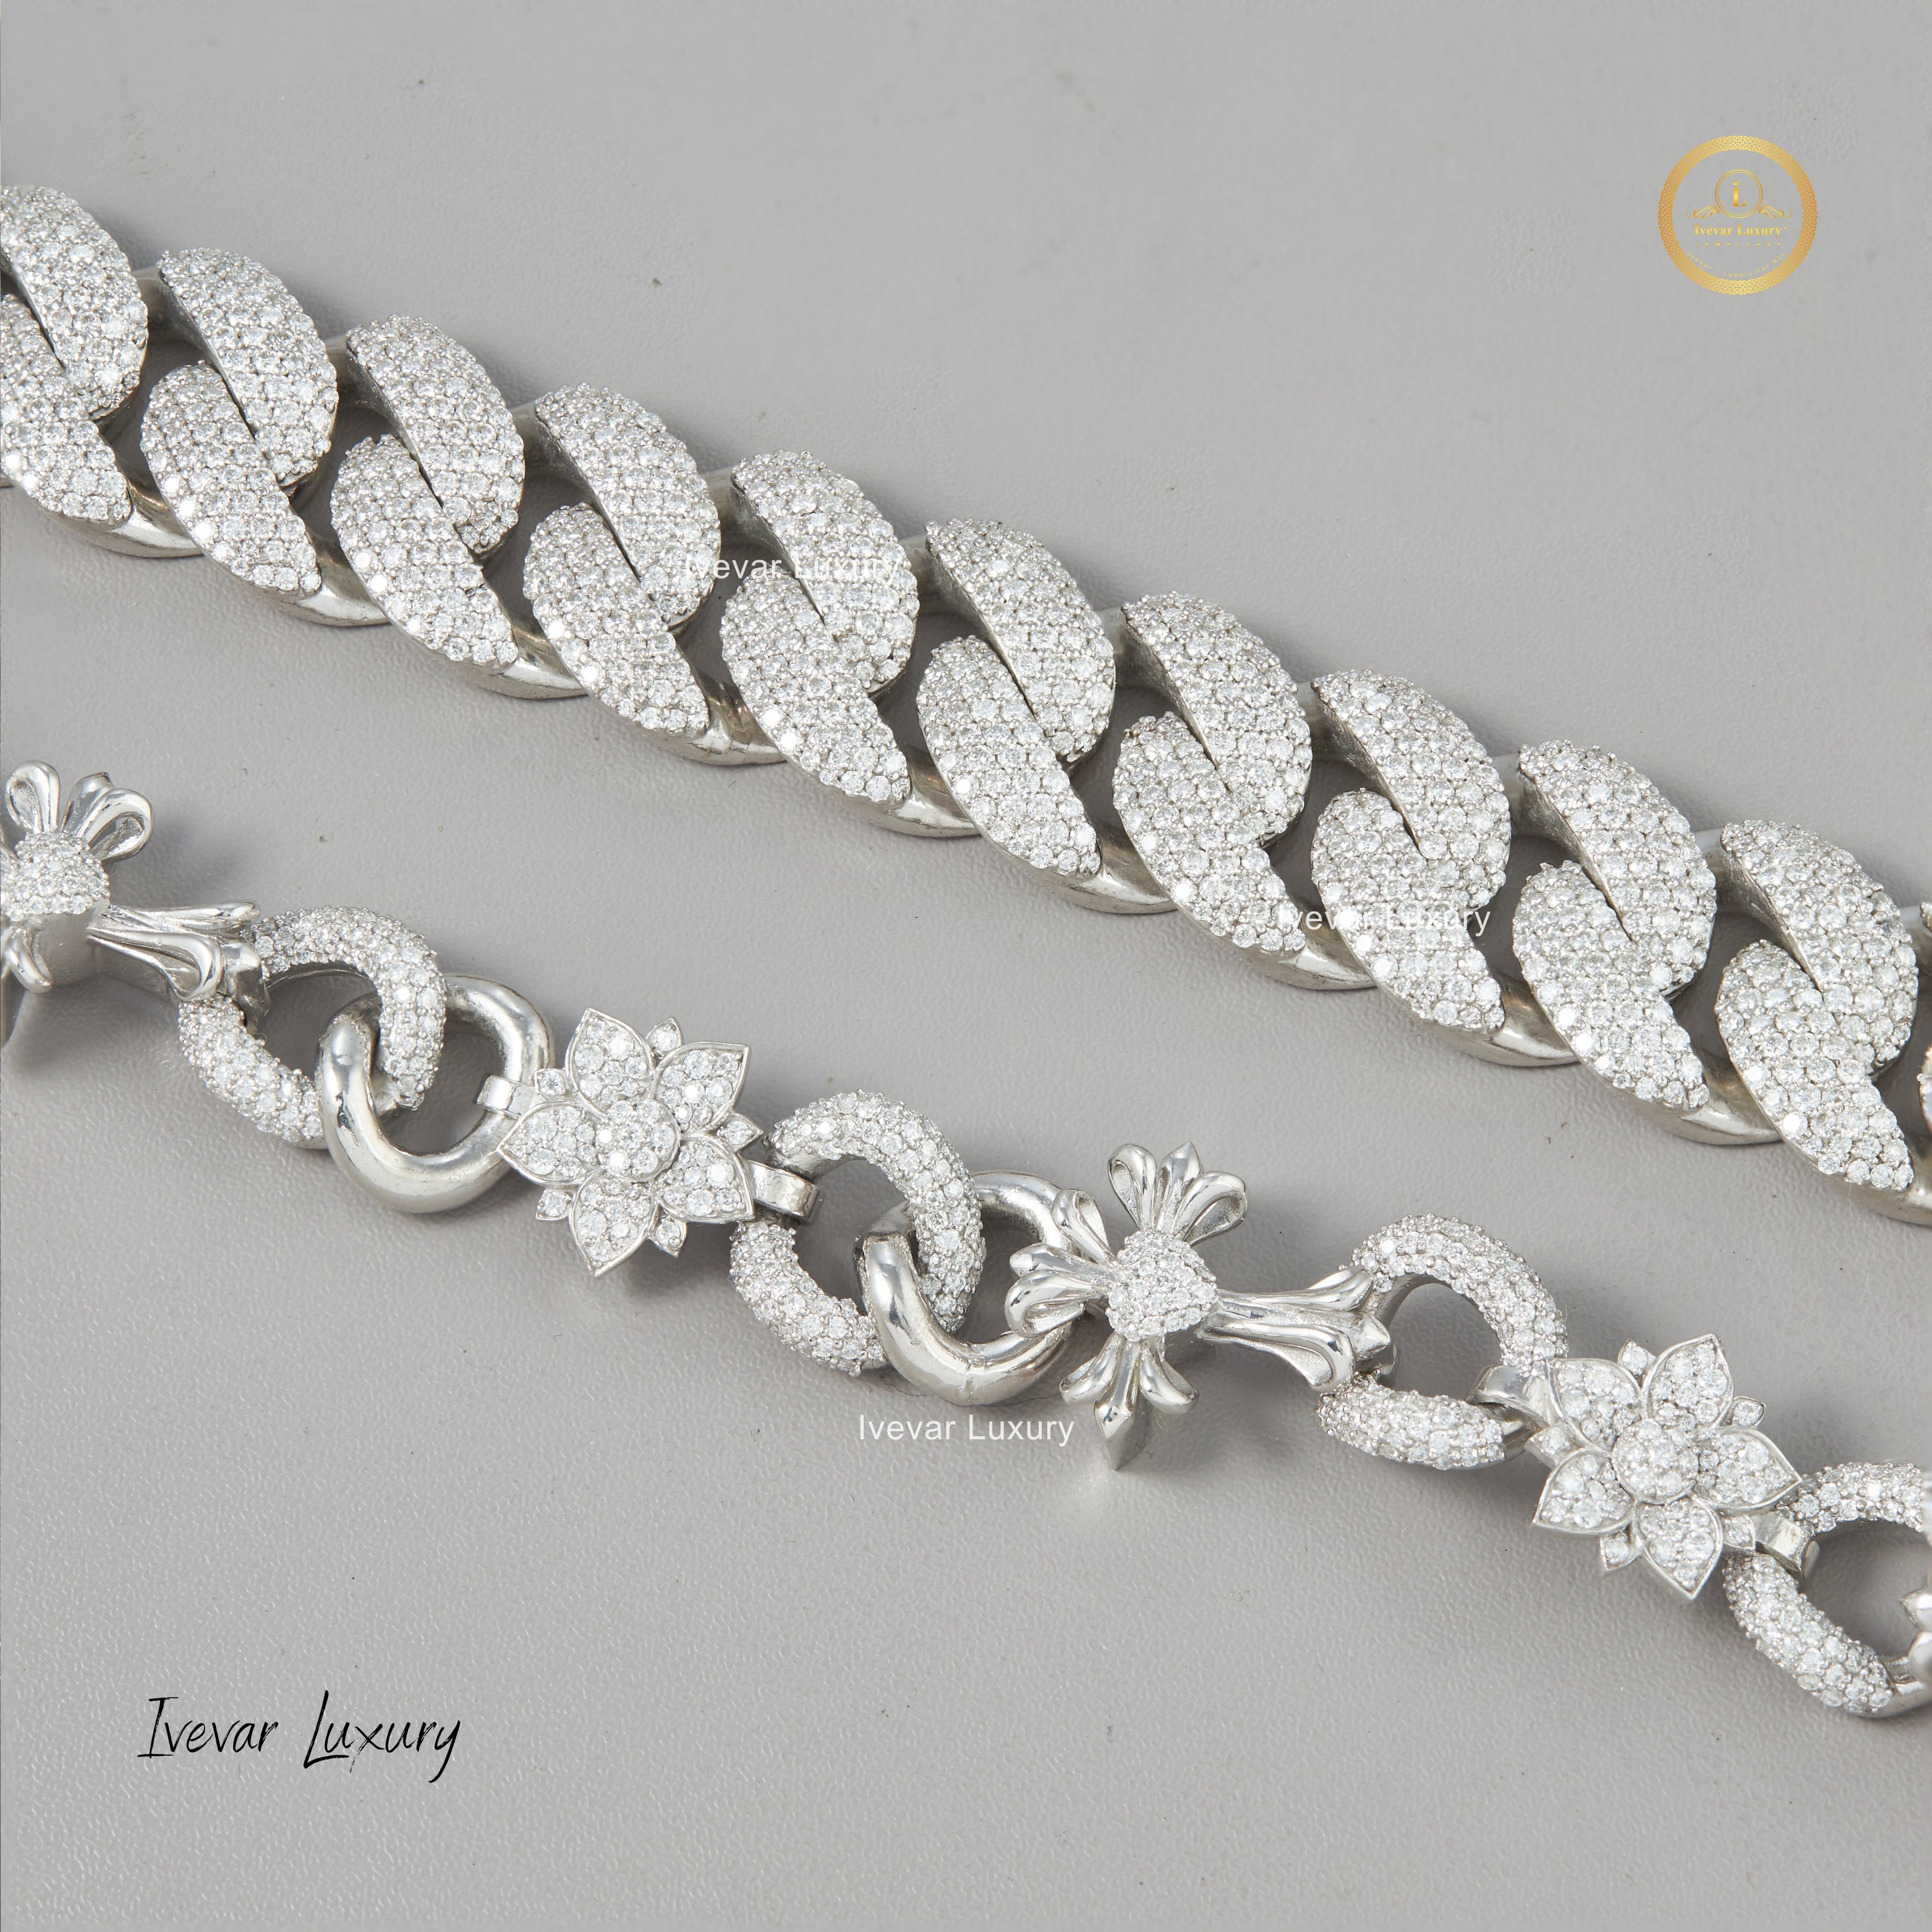 silver diamond custom chains , 22In*10mm width Round Moissanite Prong Cuban link Chain  925 Sterling silver gold - ivevar